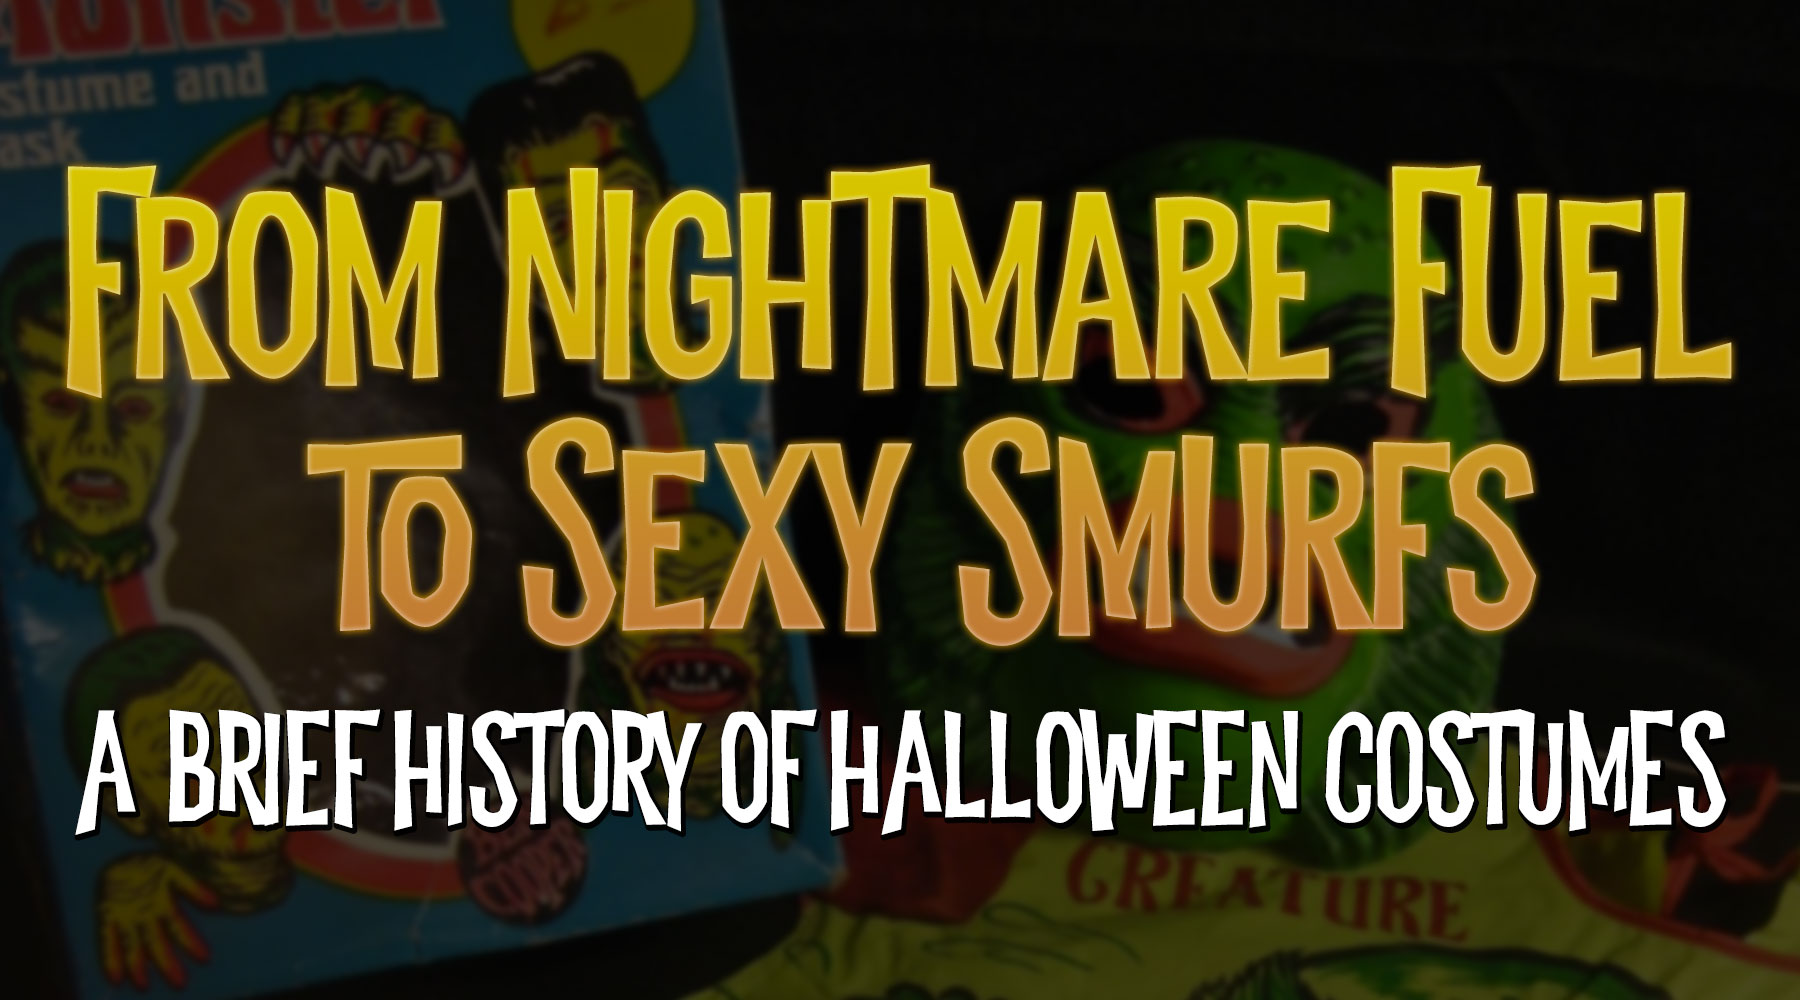 From Nightmare Fuel to Sexy Smurfs: A Brief History of Halloween Costumes